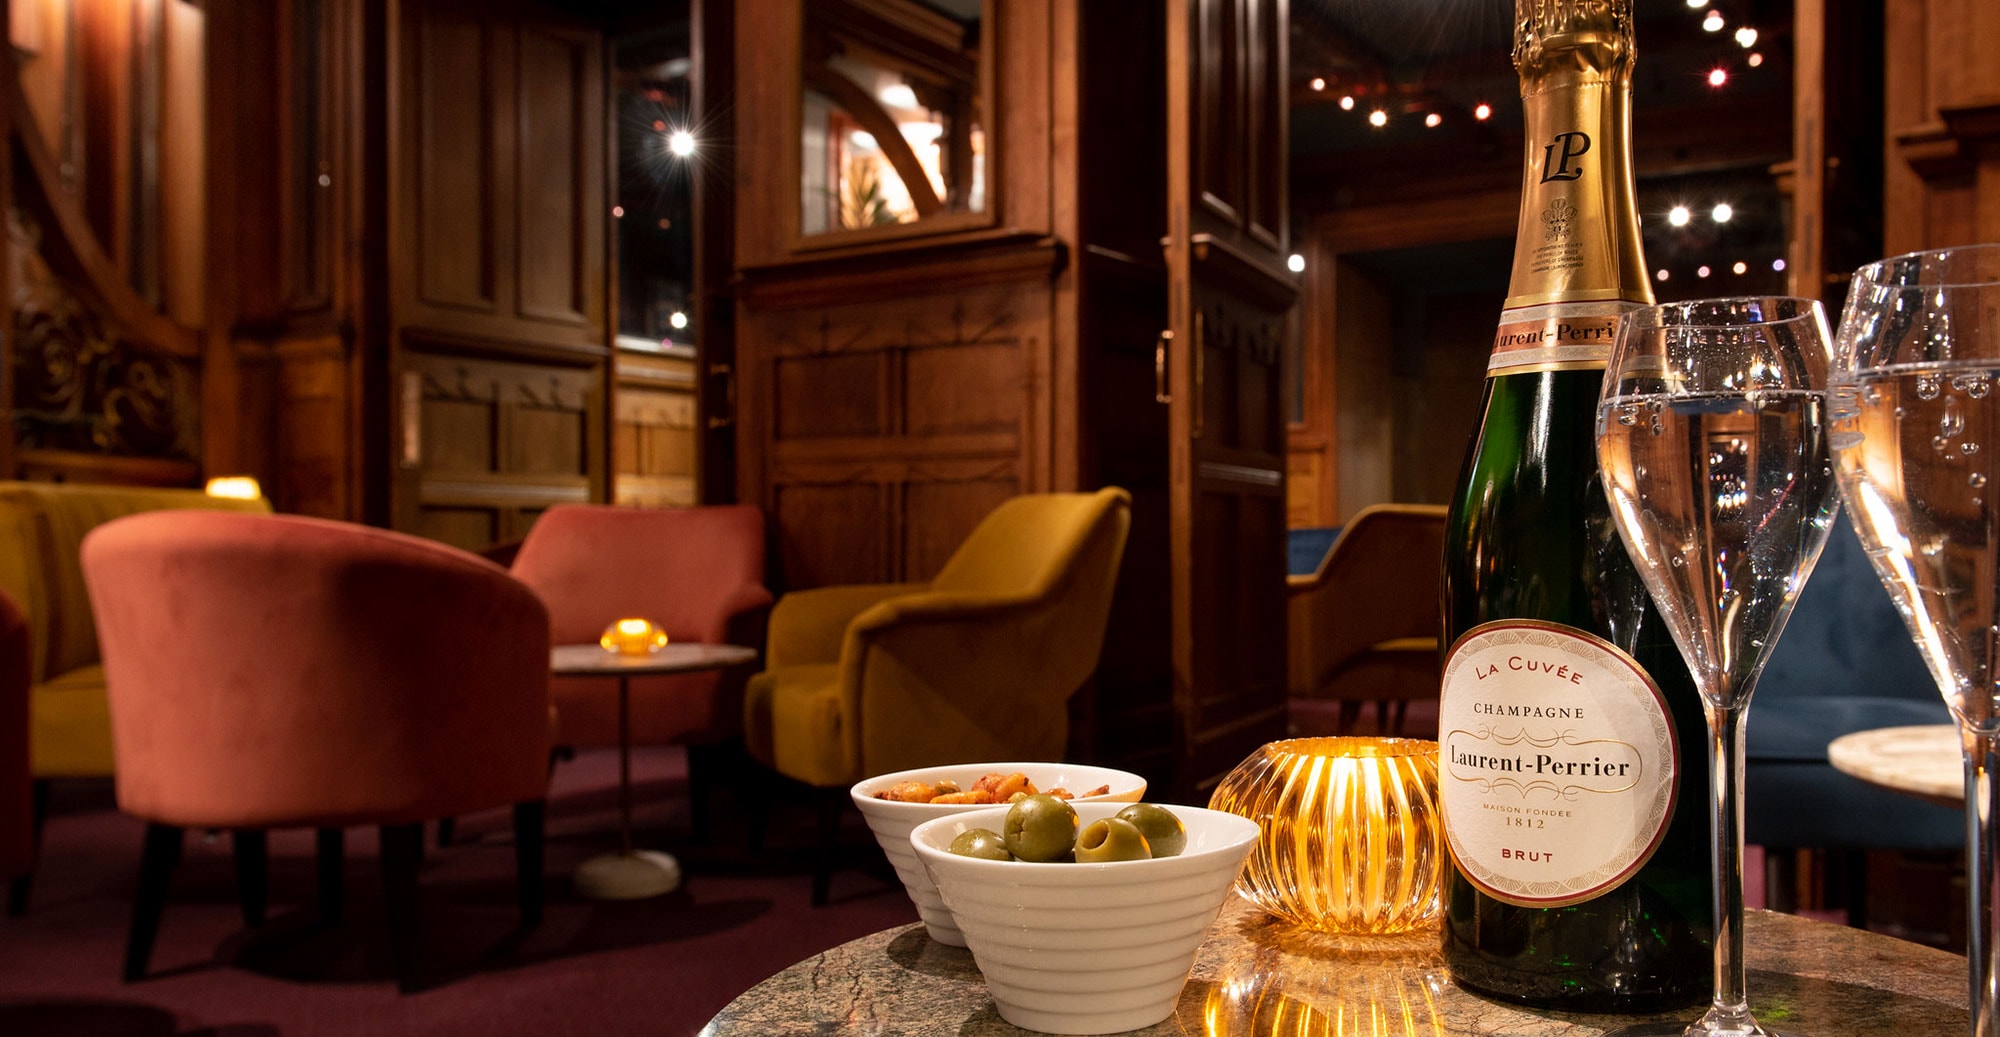 Image of a bottle of Laurent Perrier champagne in the American Bar room at the London Coliseum